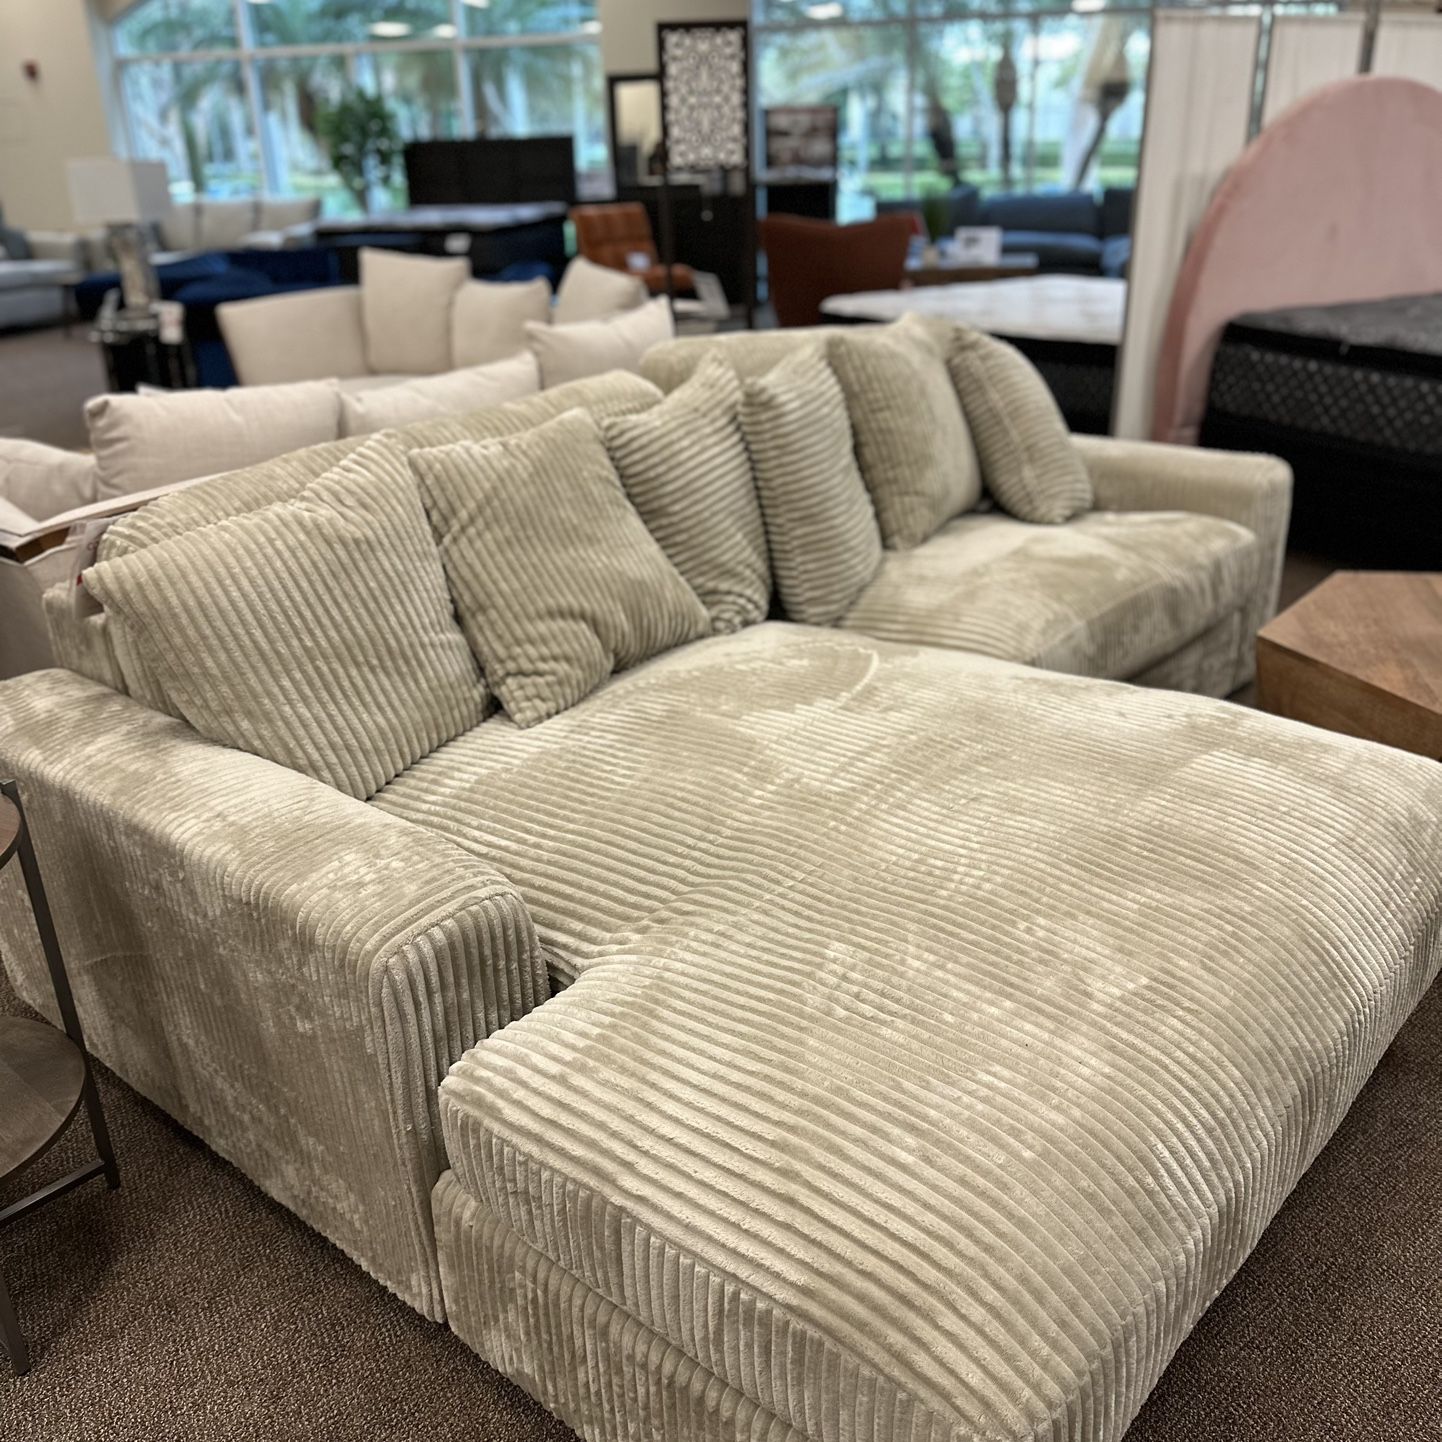 Brand new sectional in box- Flexible Payment options available $39 down. (Message for details) 